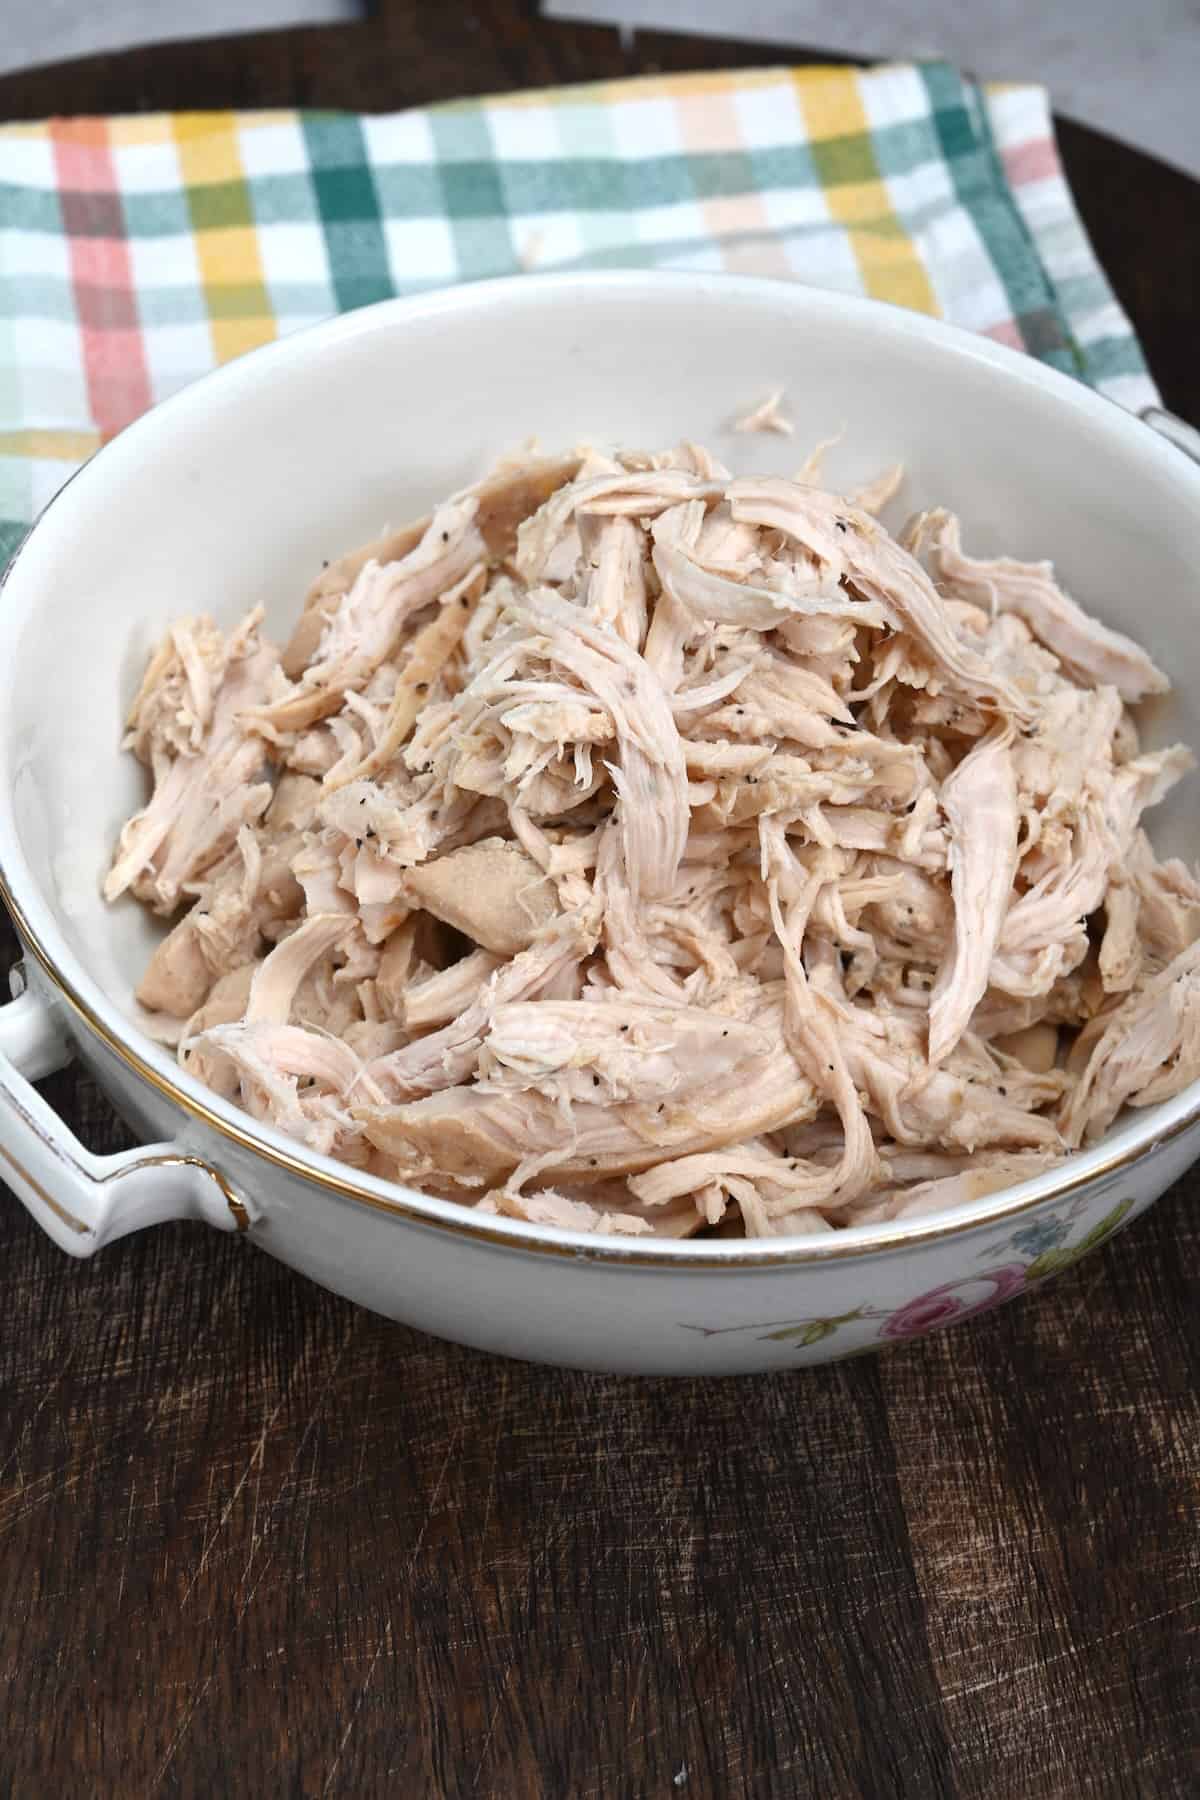 A serving bowl with shredded chicken